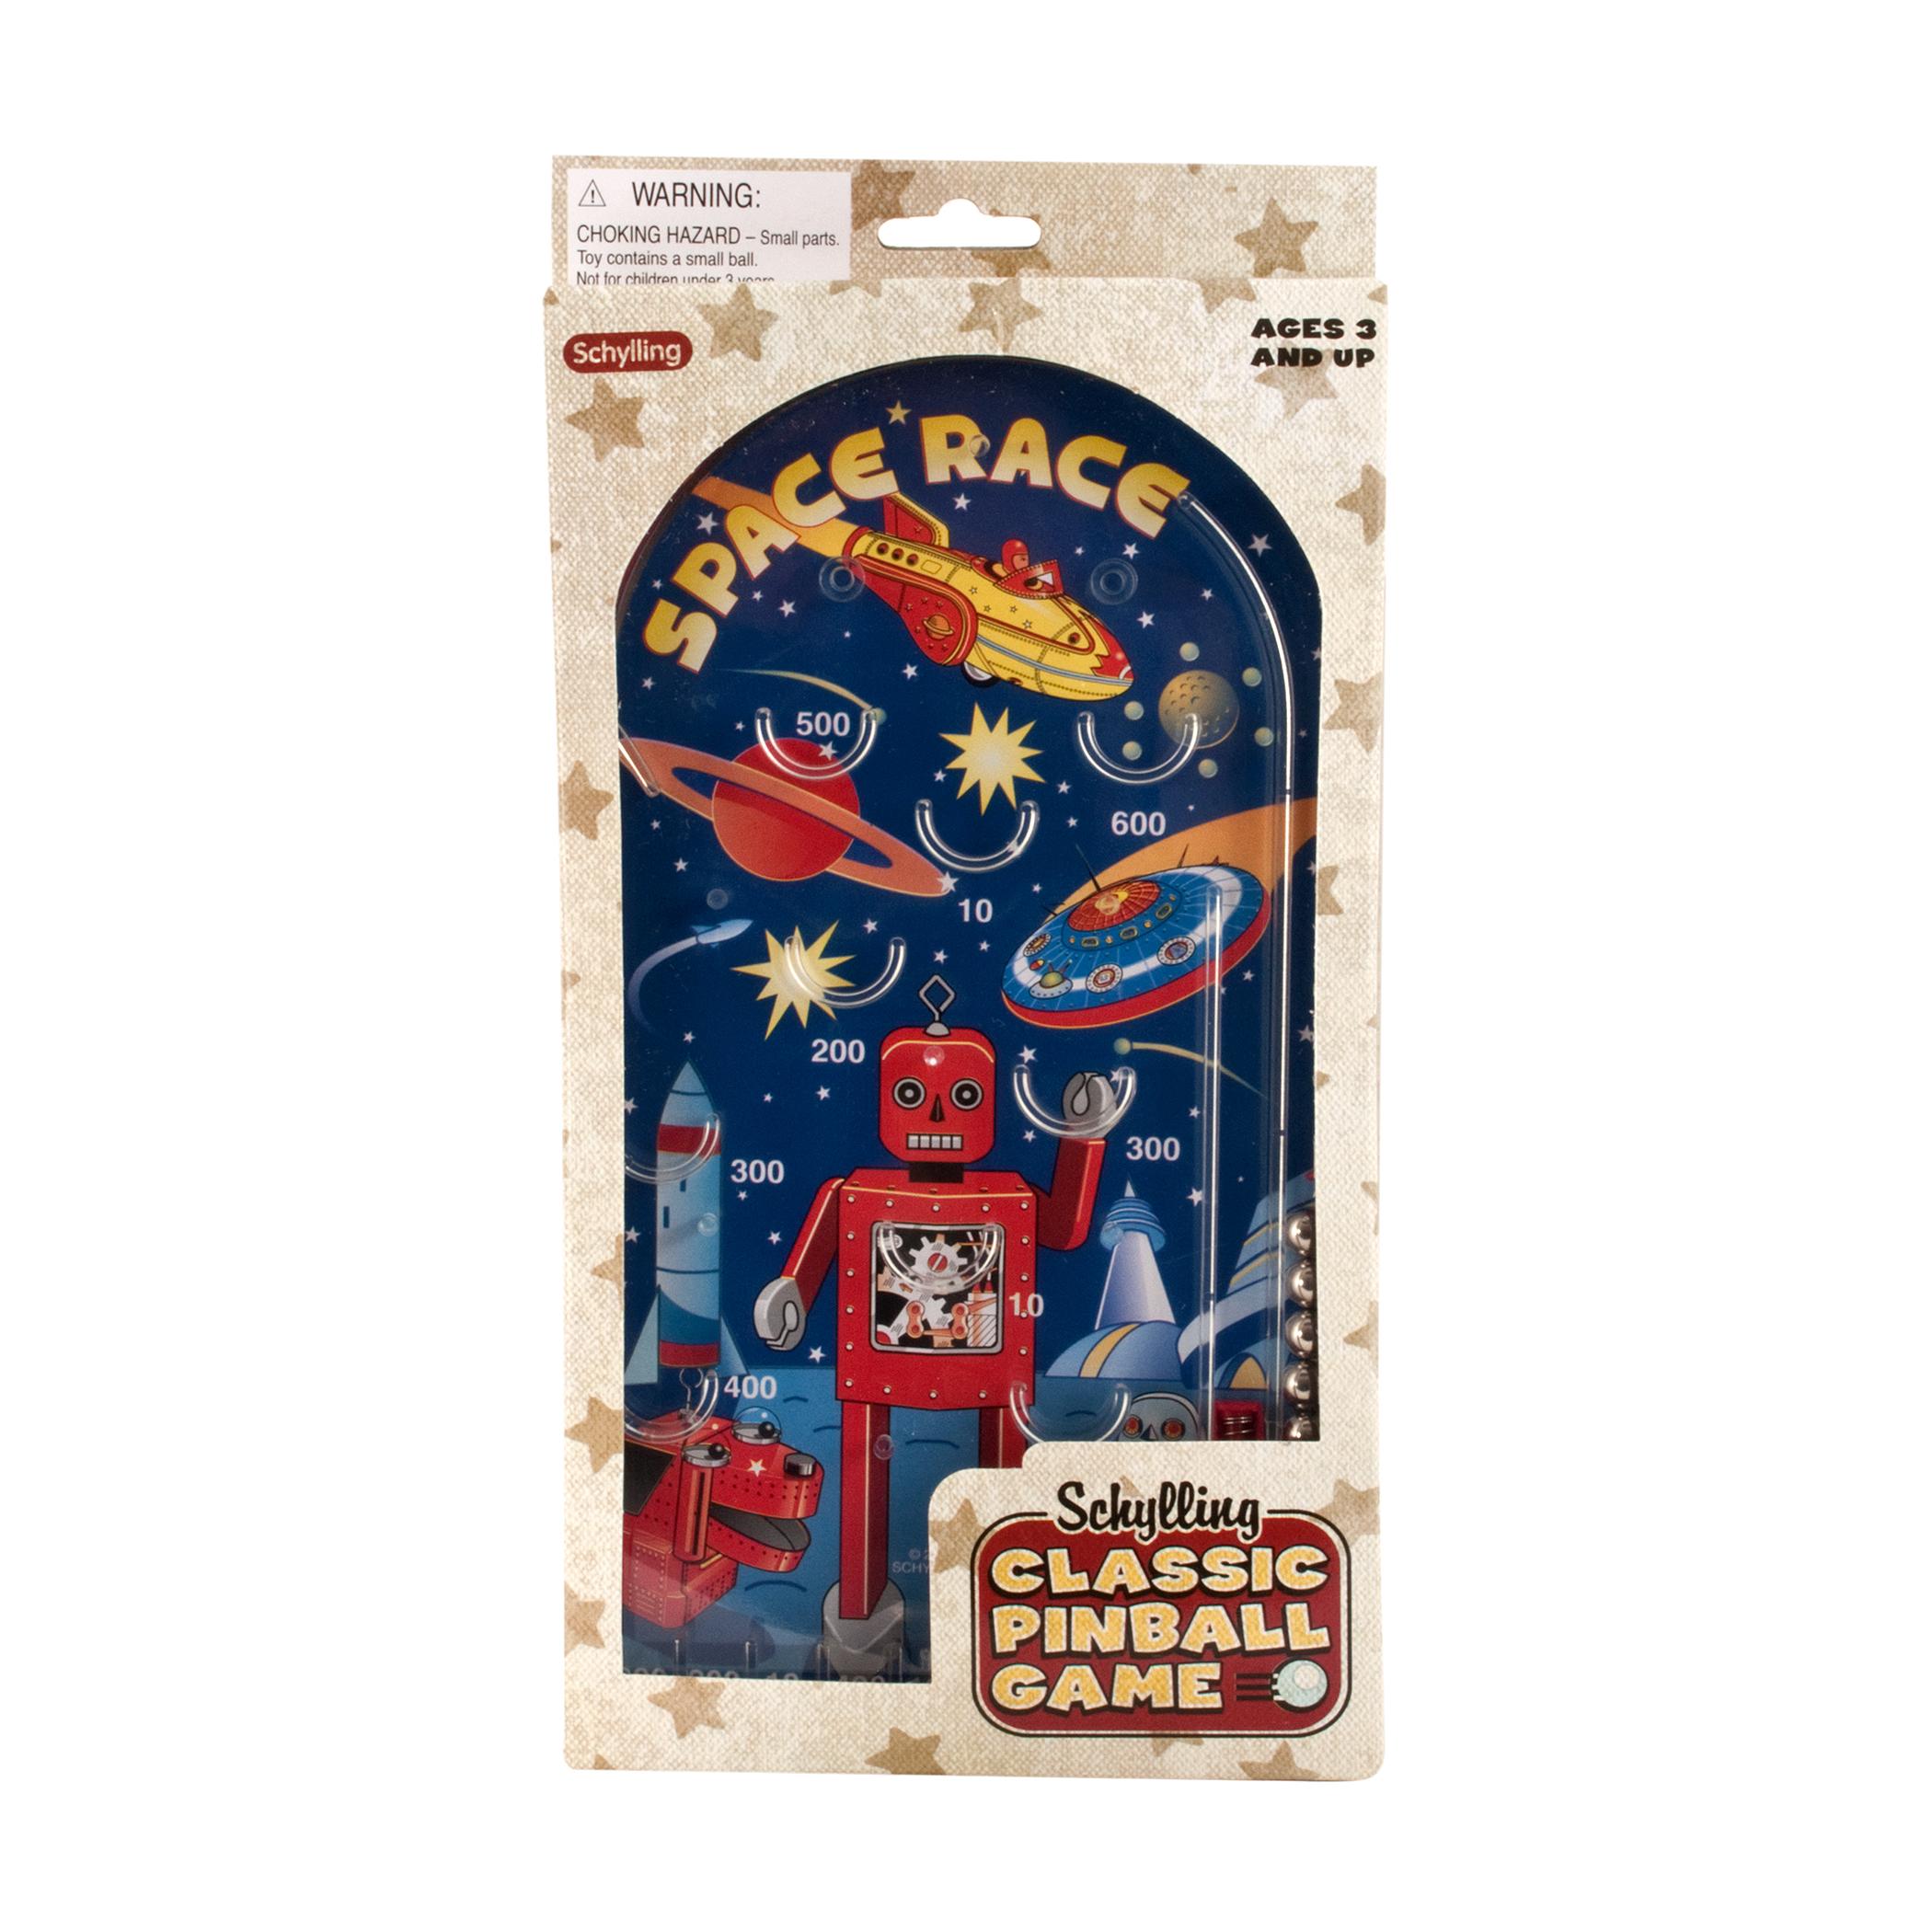 Schylling Space Race 6 Ball Pinball 2007 Robot Rocket Ship Game Toy for sale online 